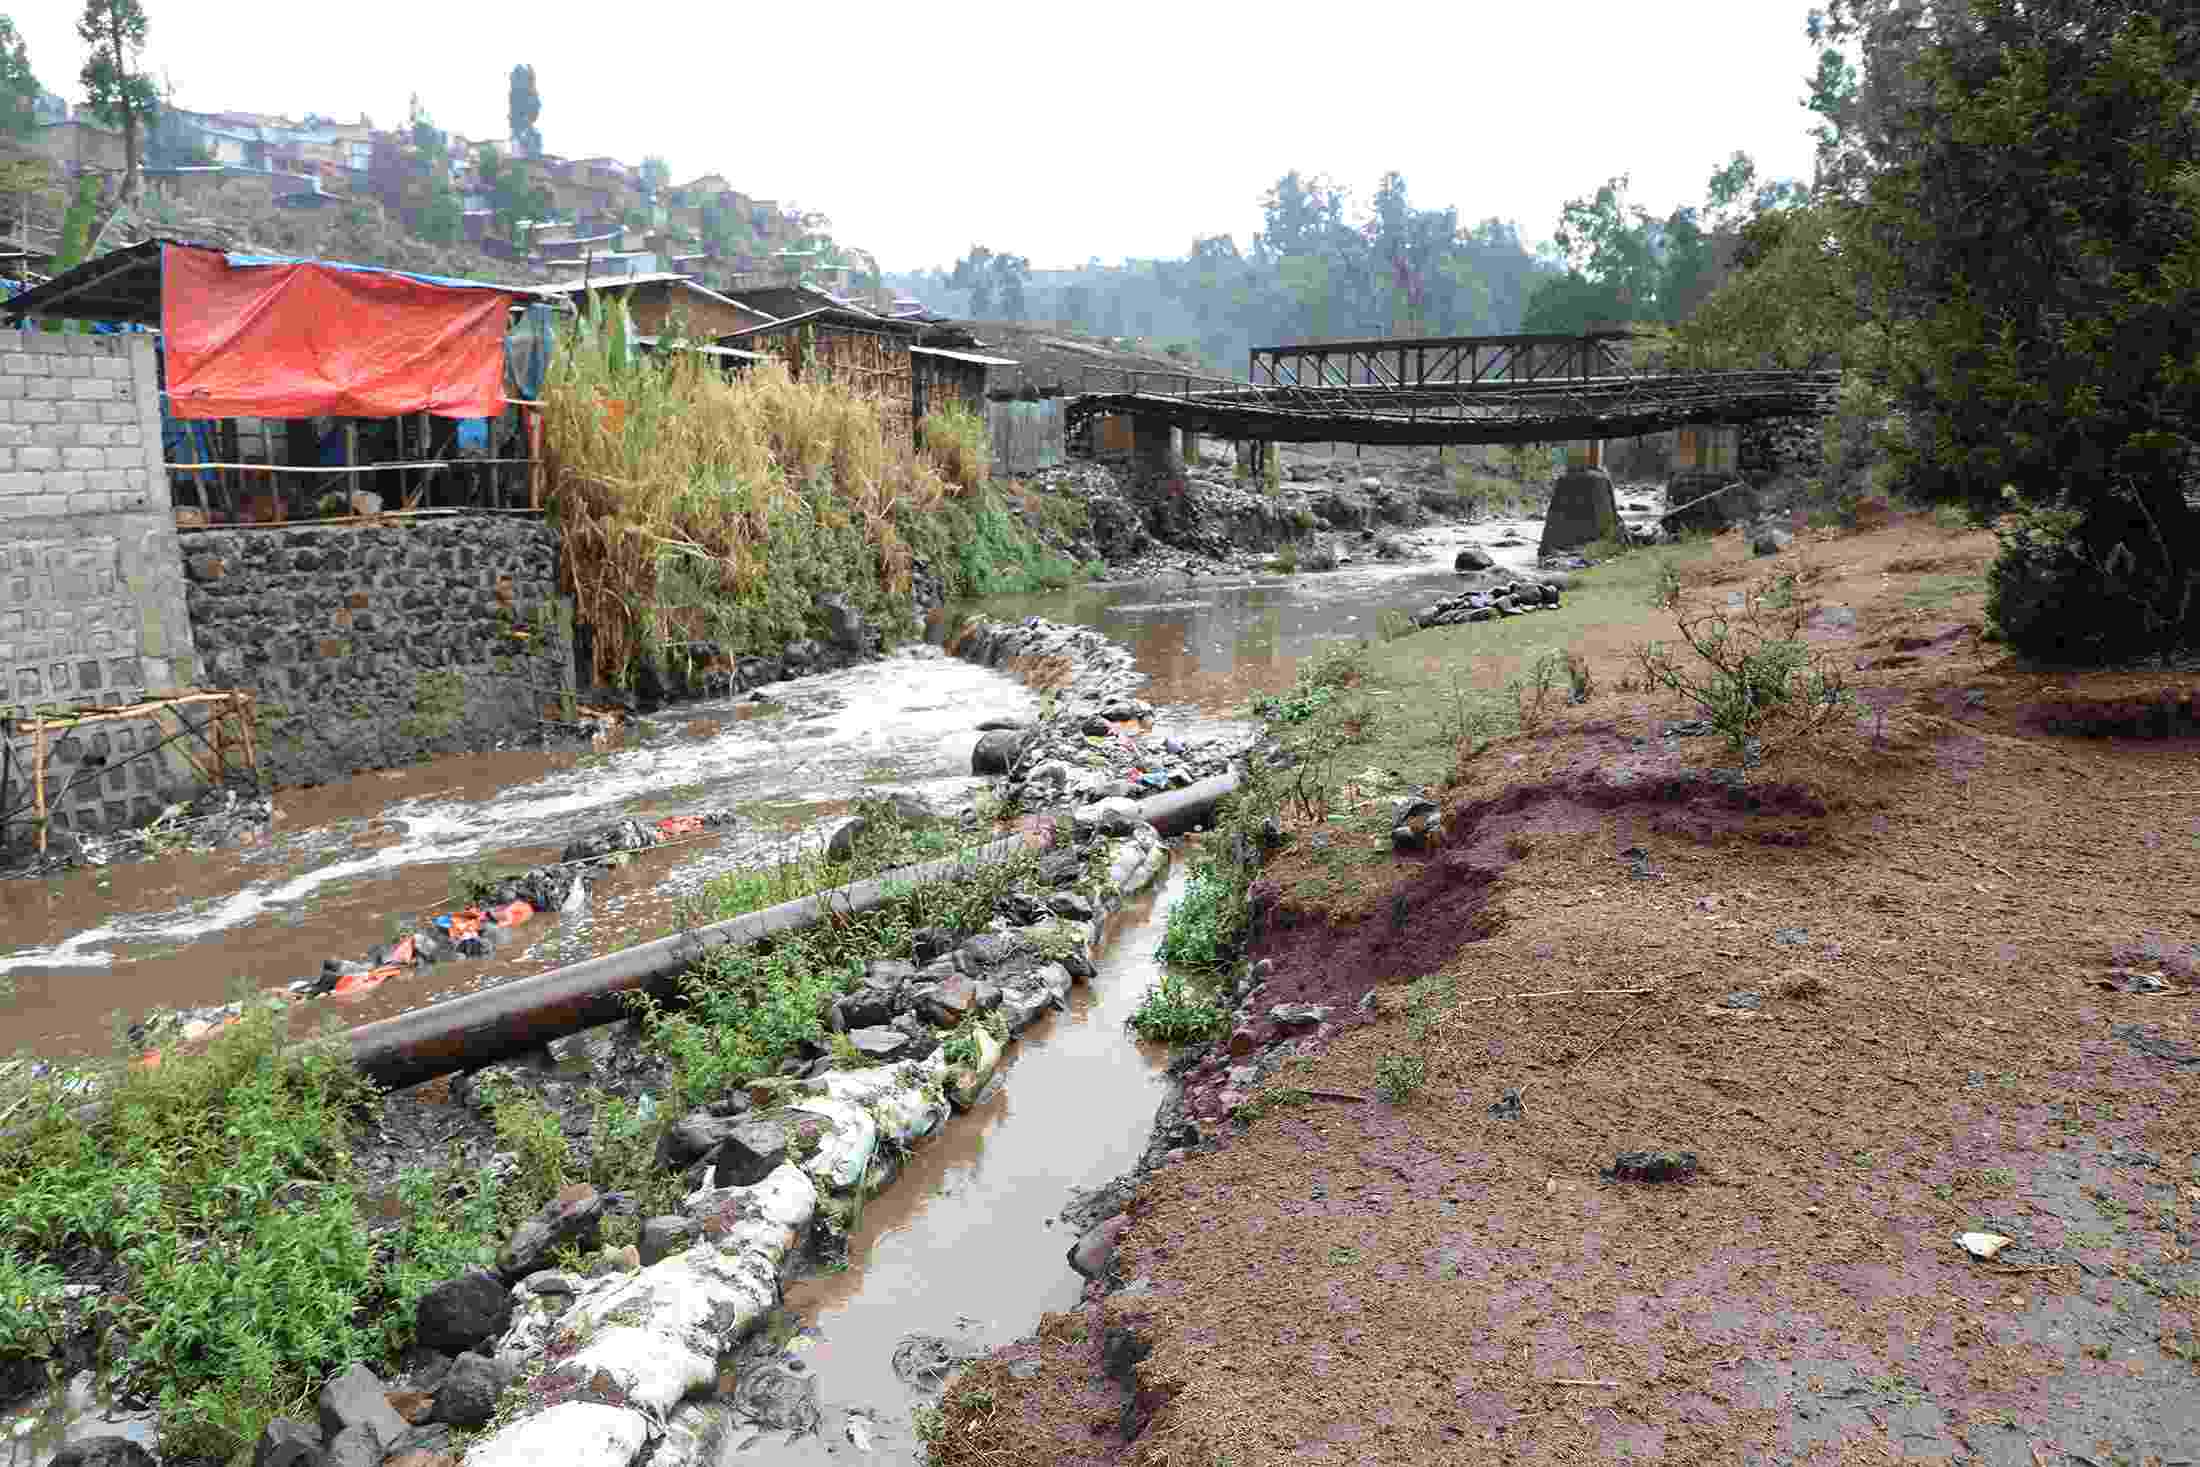 A heavily polluted stretch of the Akaki River, with visible detritus and discoloured water 